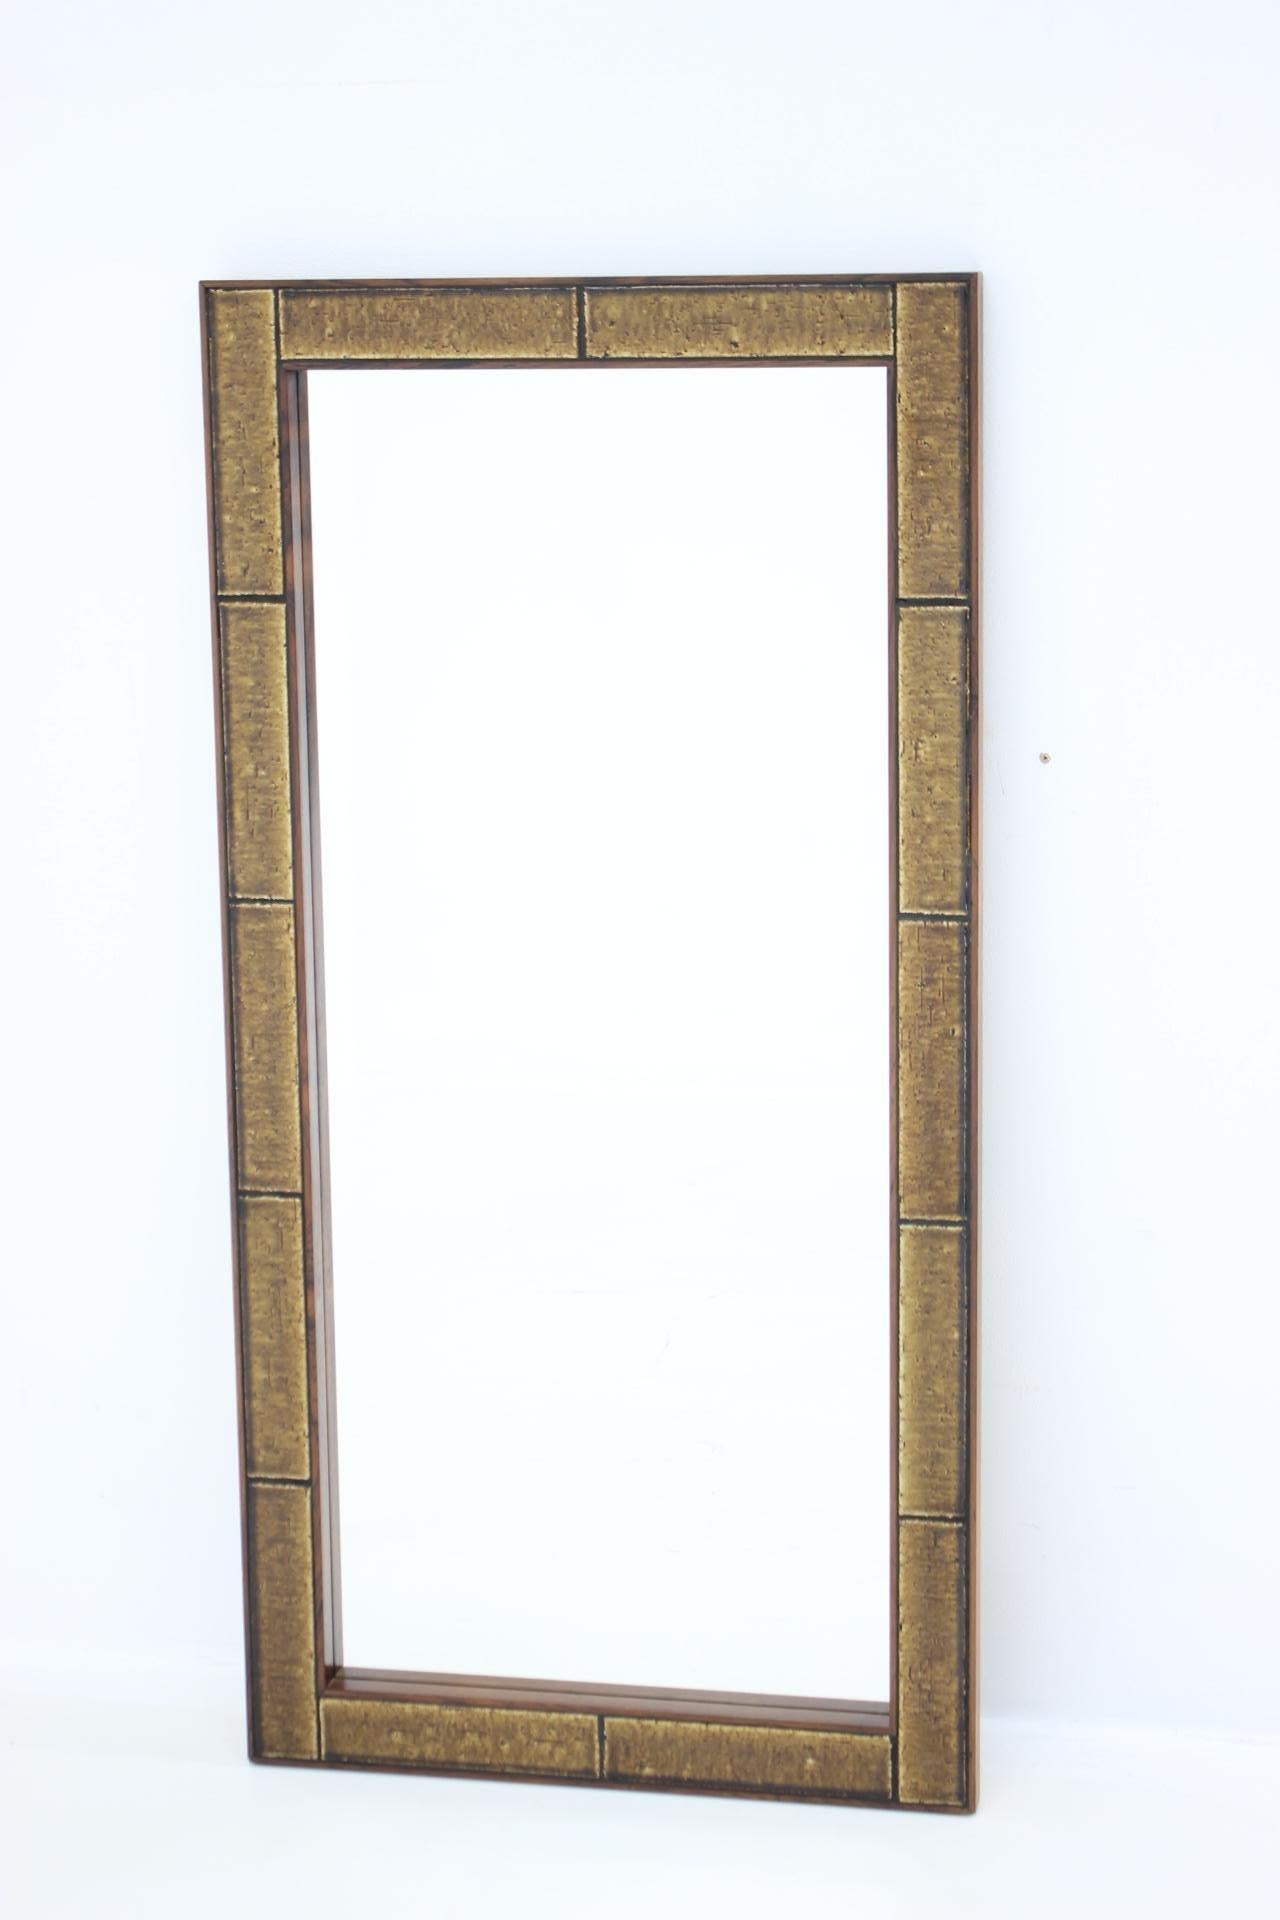 1960s Wood and Tile Mirror, Denmark For Sale 2